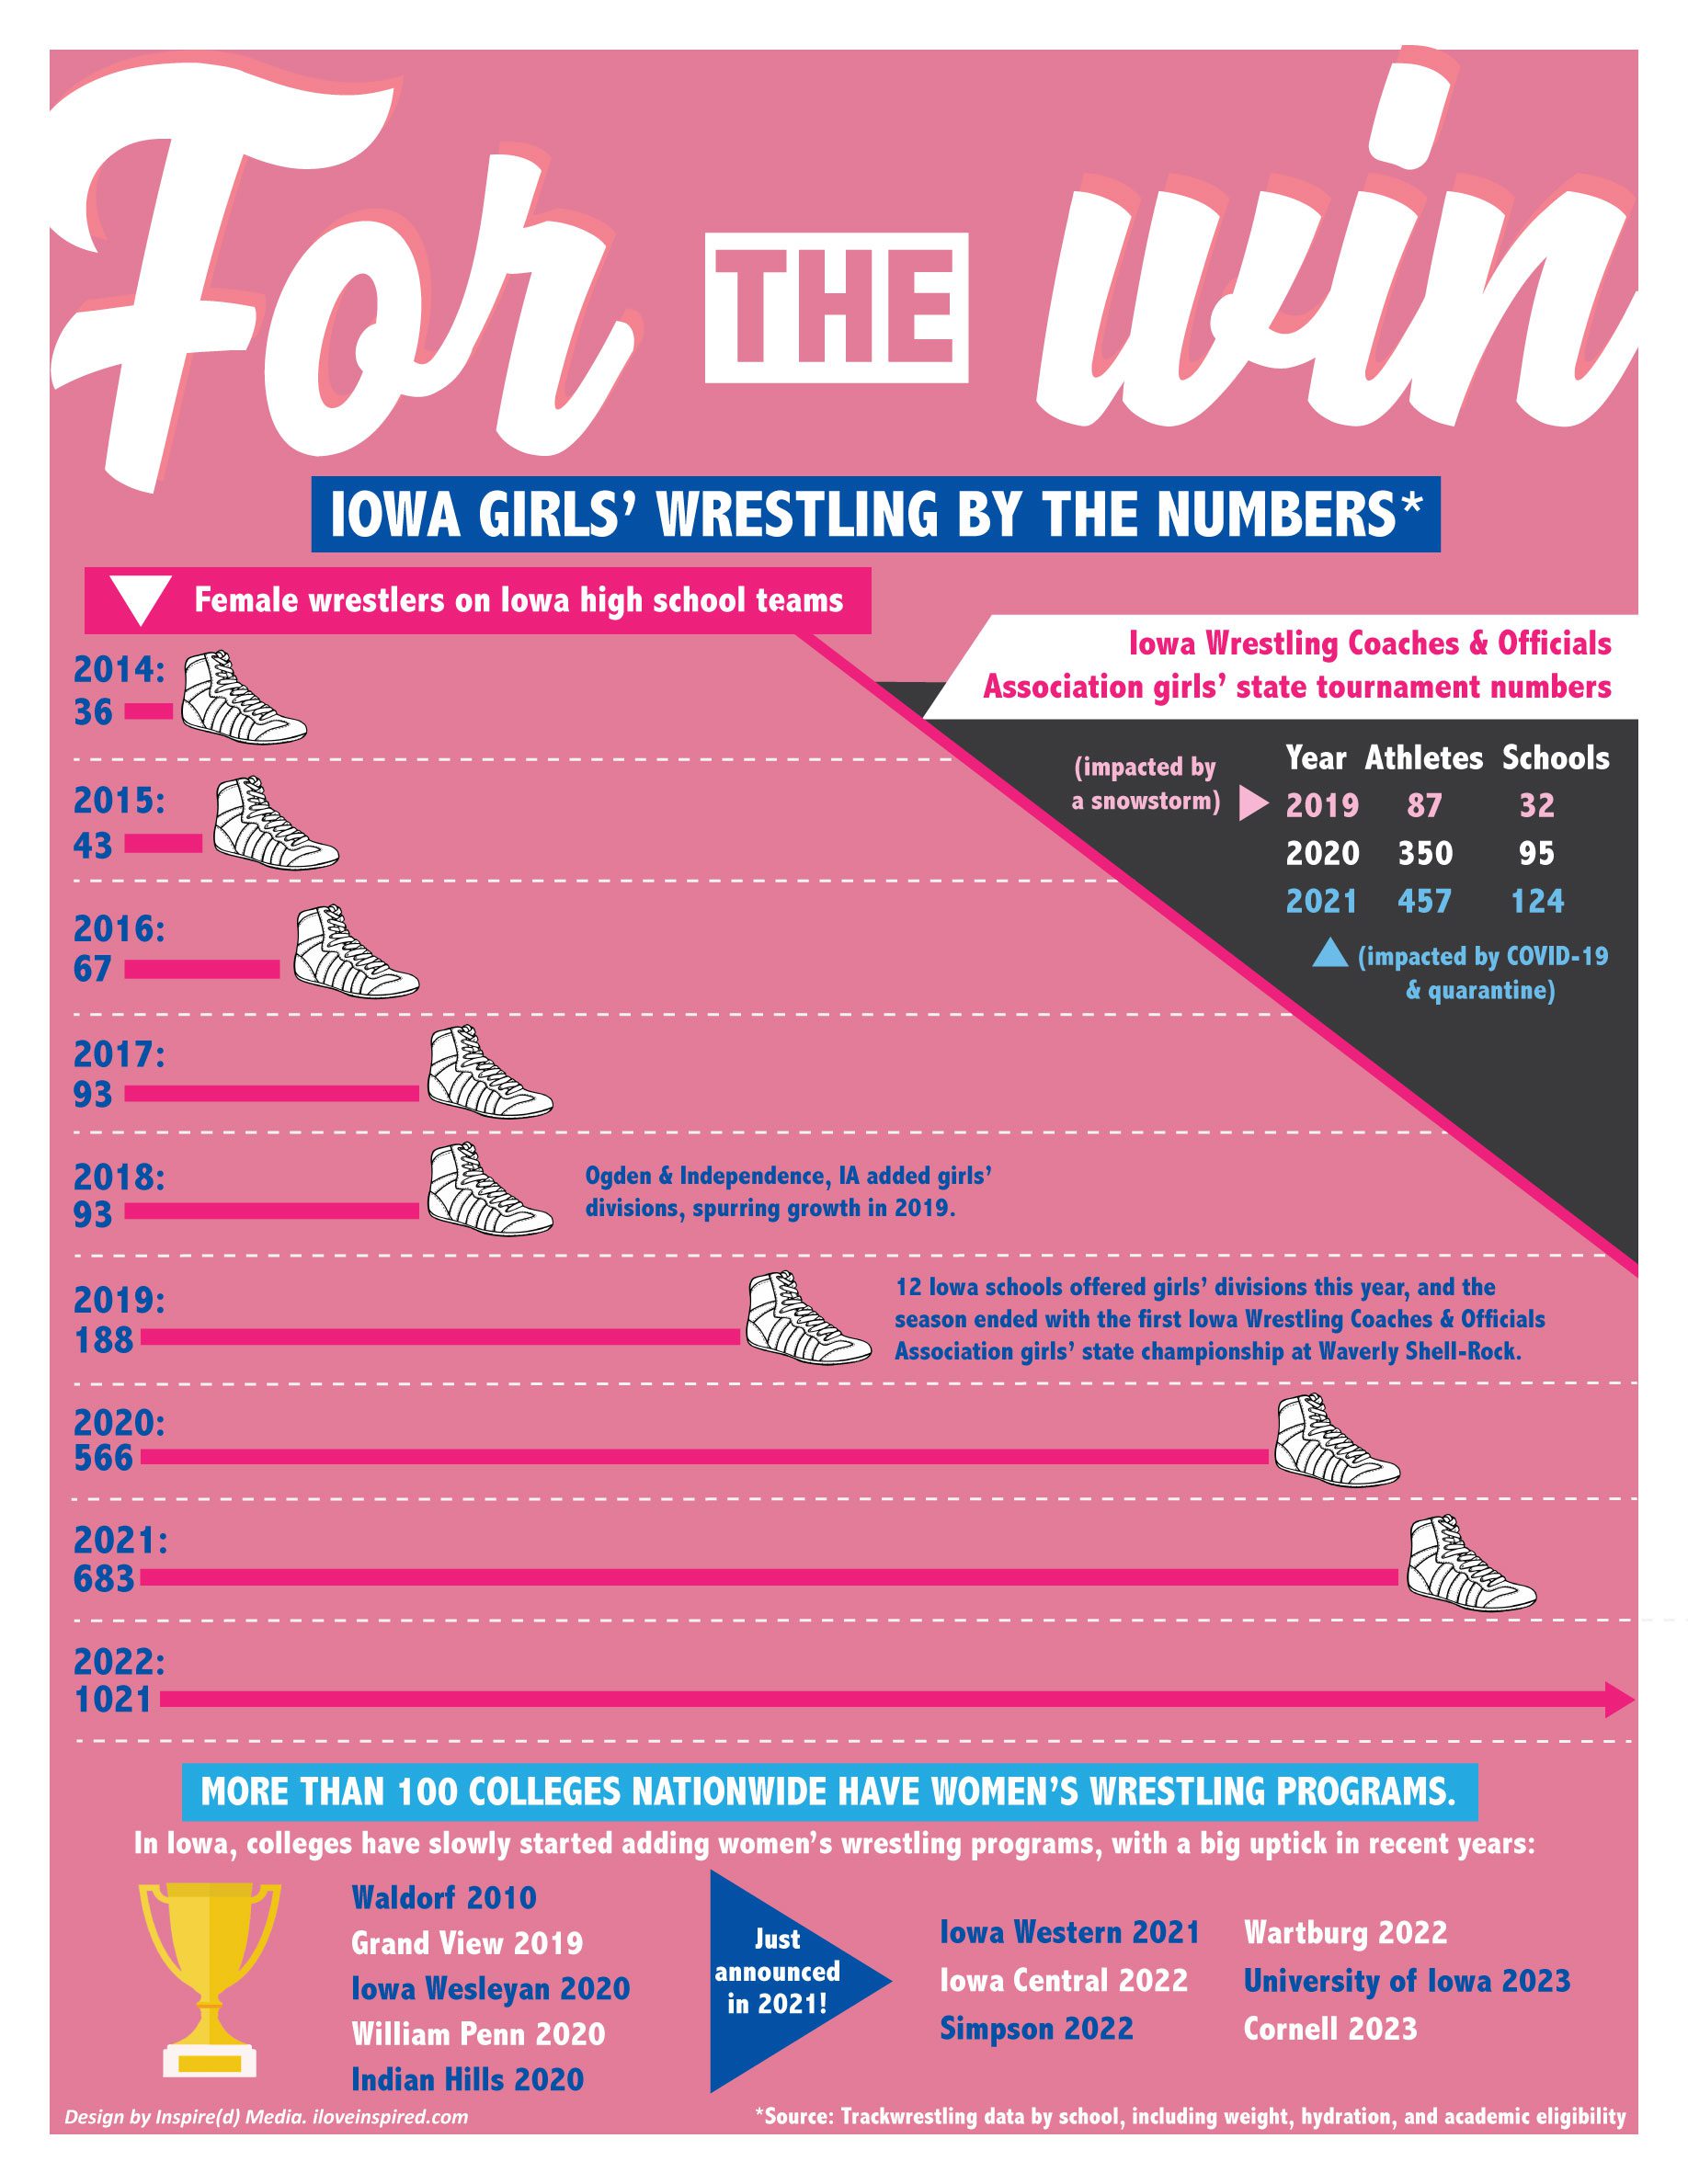 Graphic depicting Iowa Girls' Wrestling by the numbers